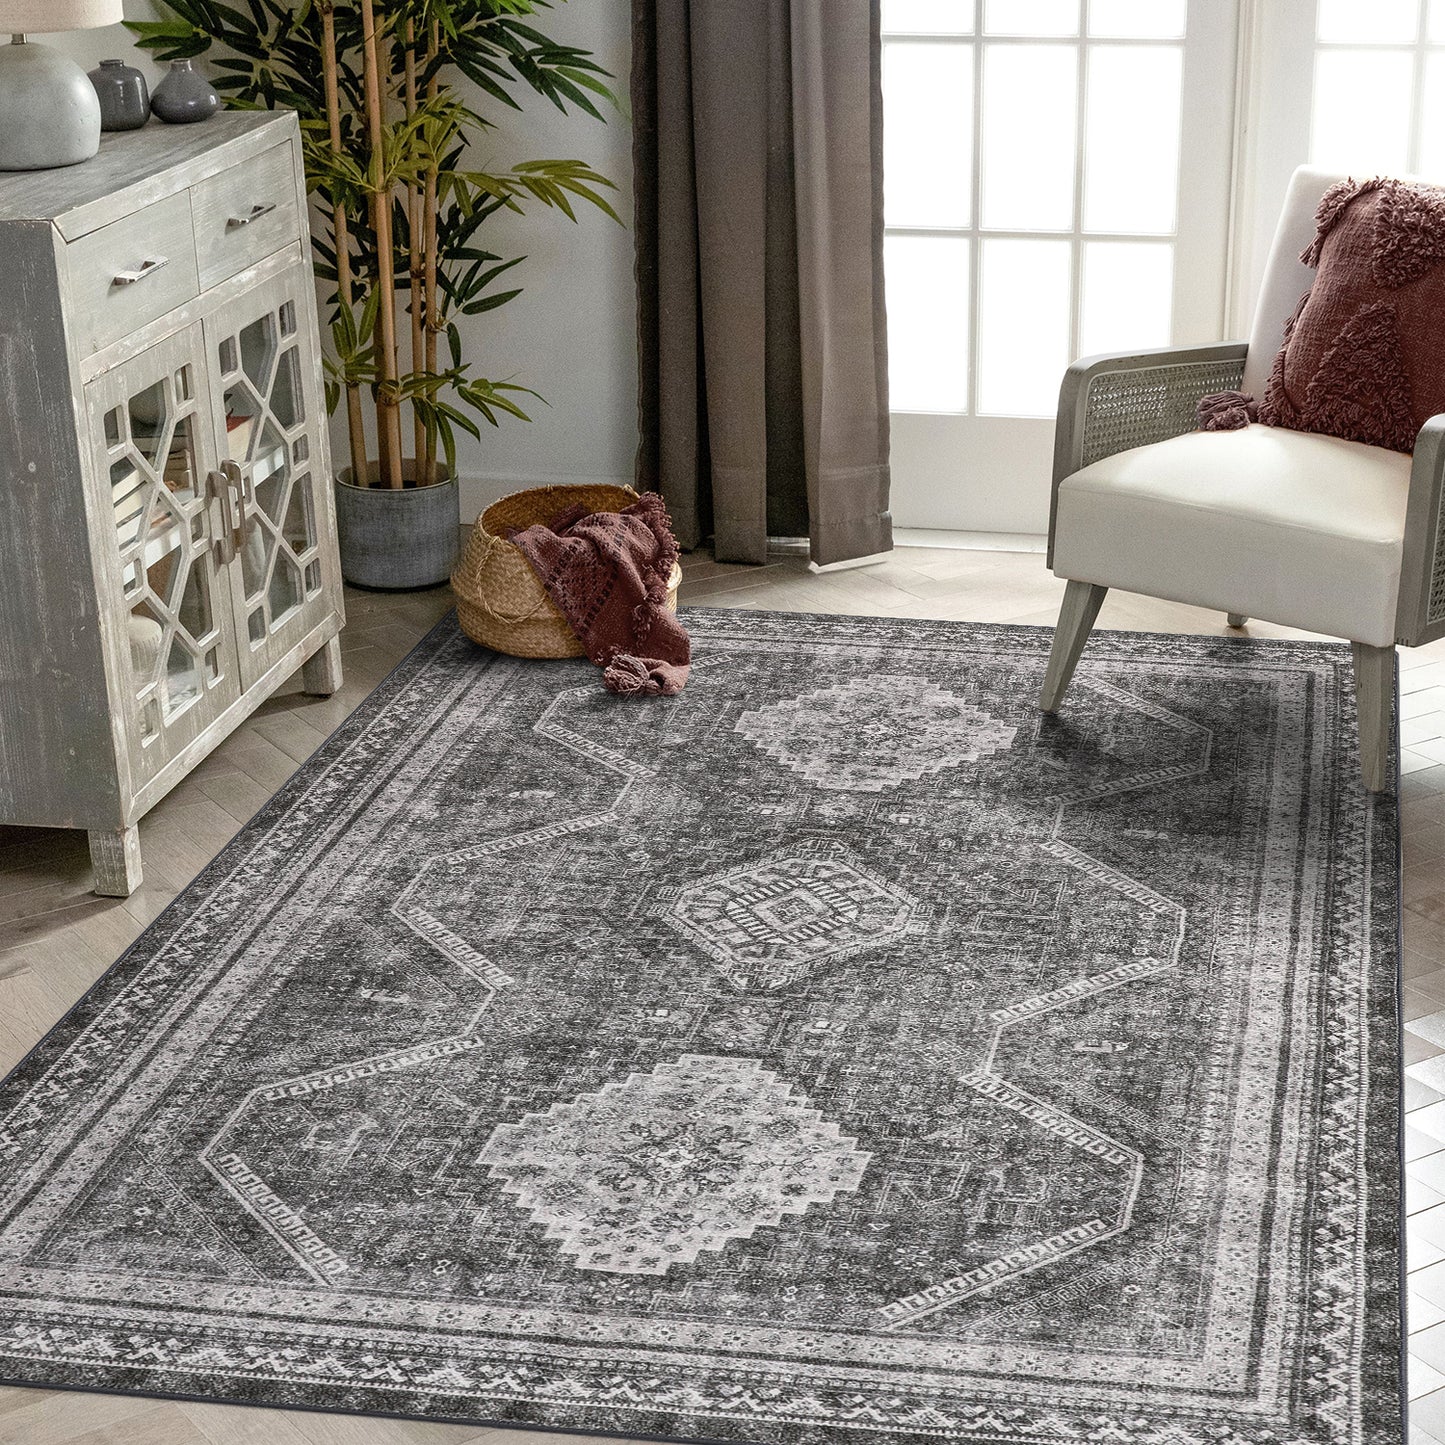 GENIMO Area Rugs, Non Slip Machine Washable Indoor Rug, Low Pile Chenille Print Mat for  for Living Room, Entryway,Hallway, Bedroom, Kitchen and Corridor, Gray